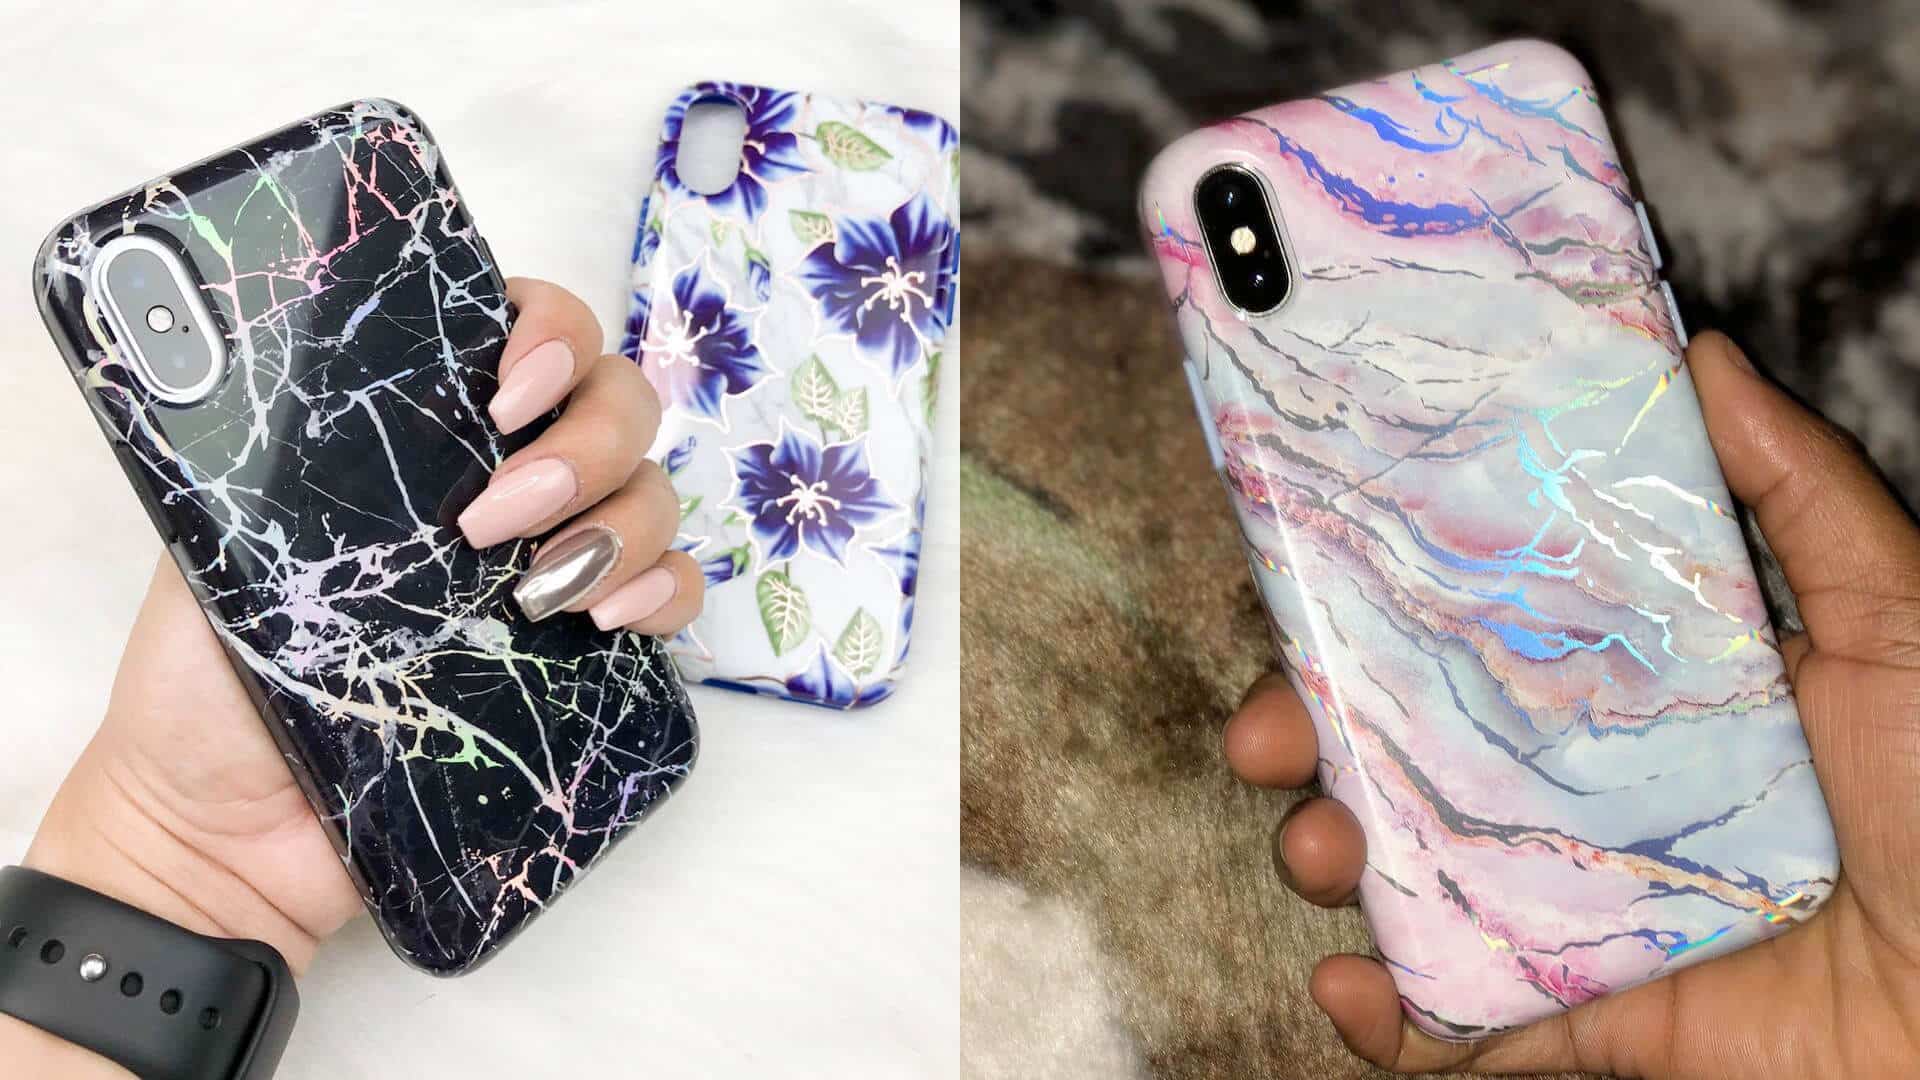 Velvet caviar iphone xs xs max and xr cases